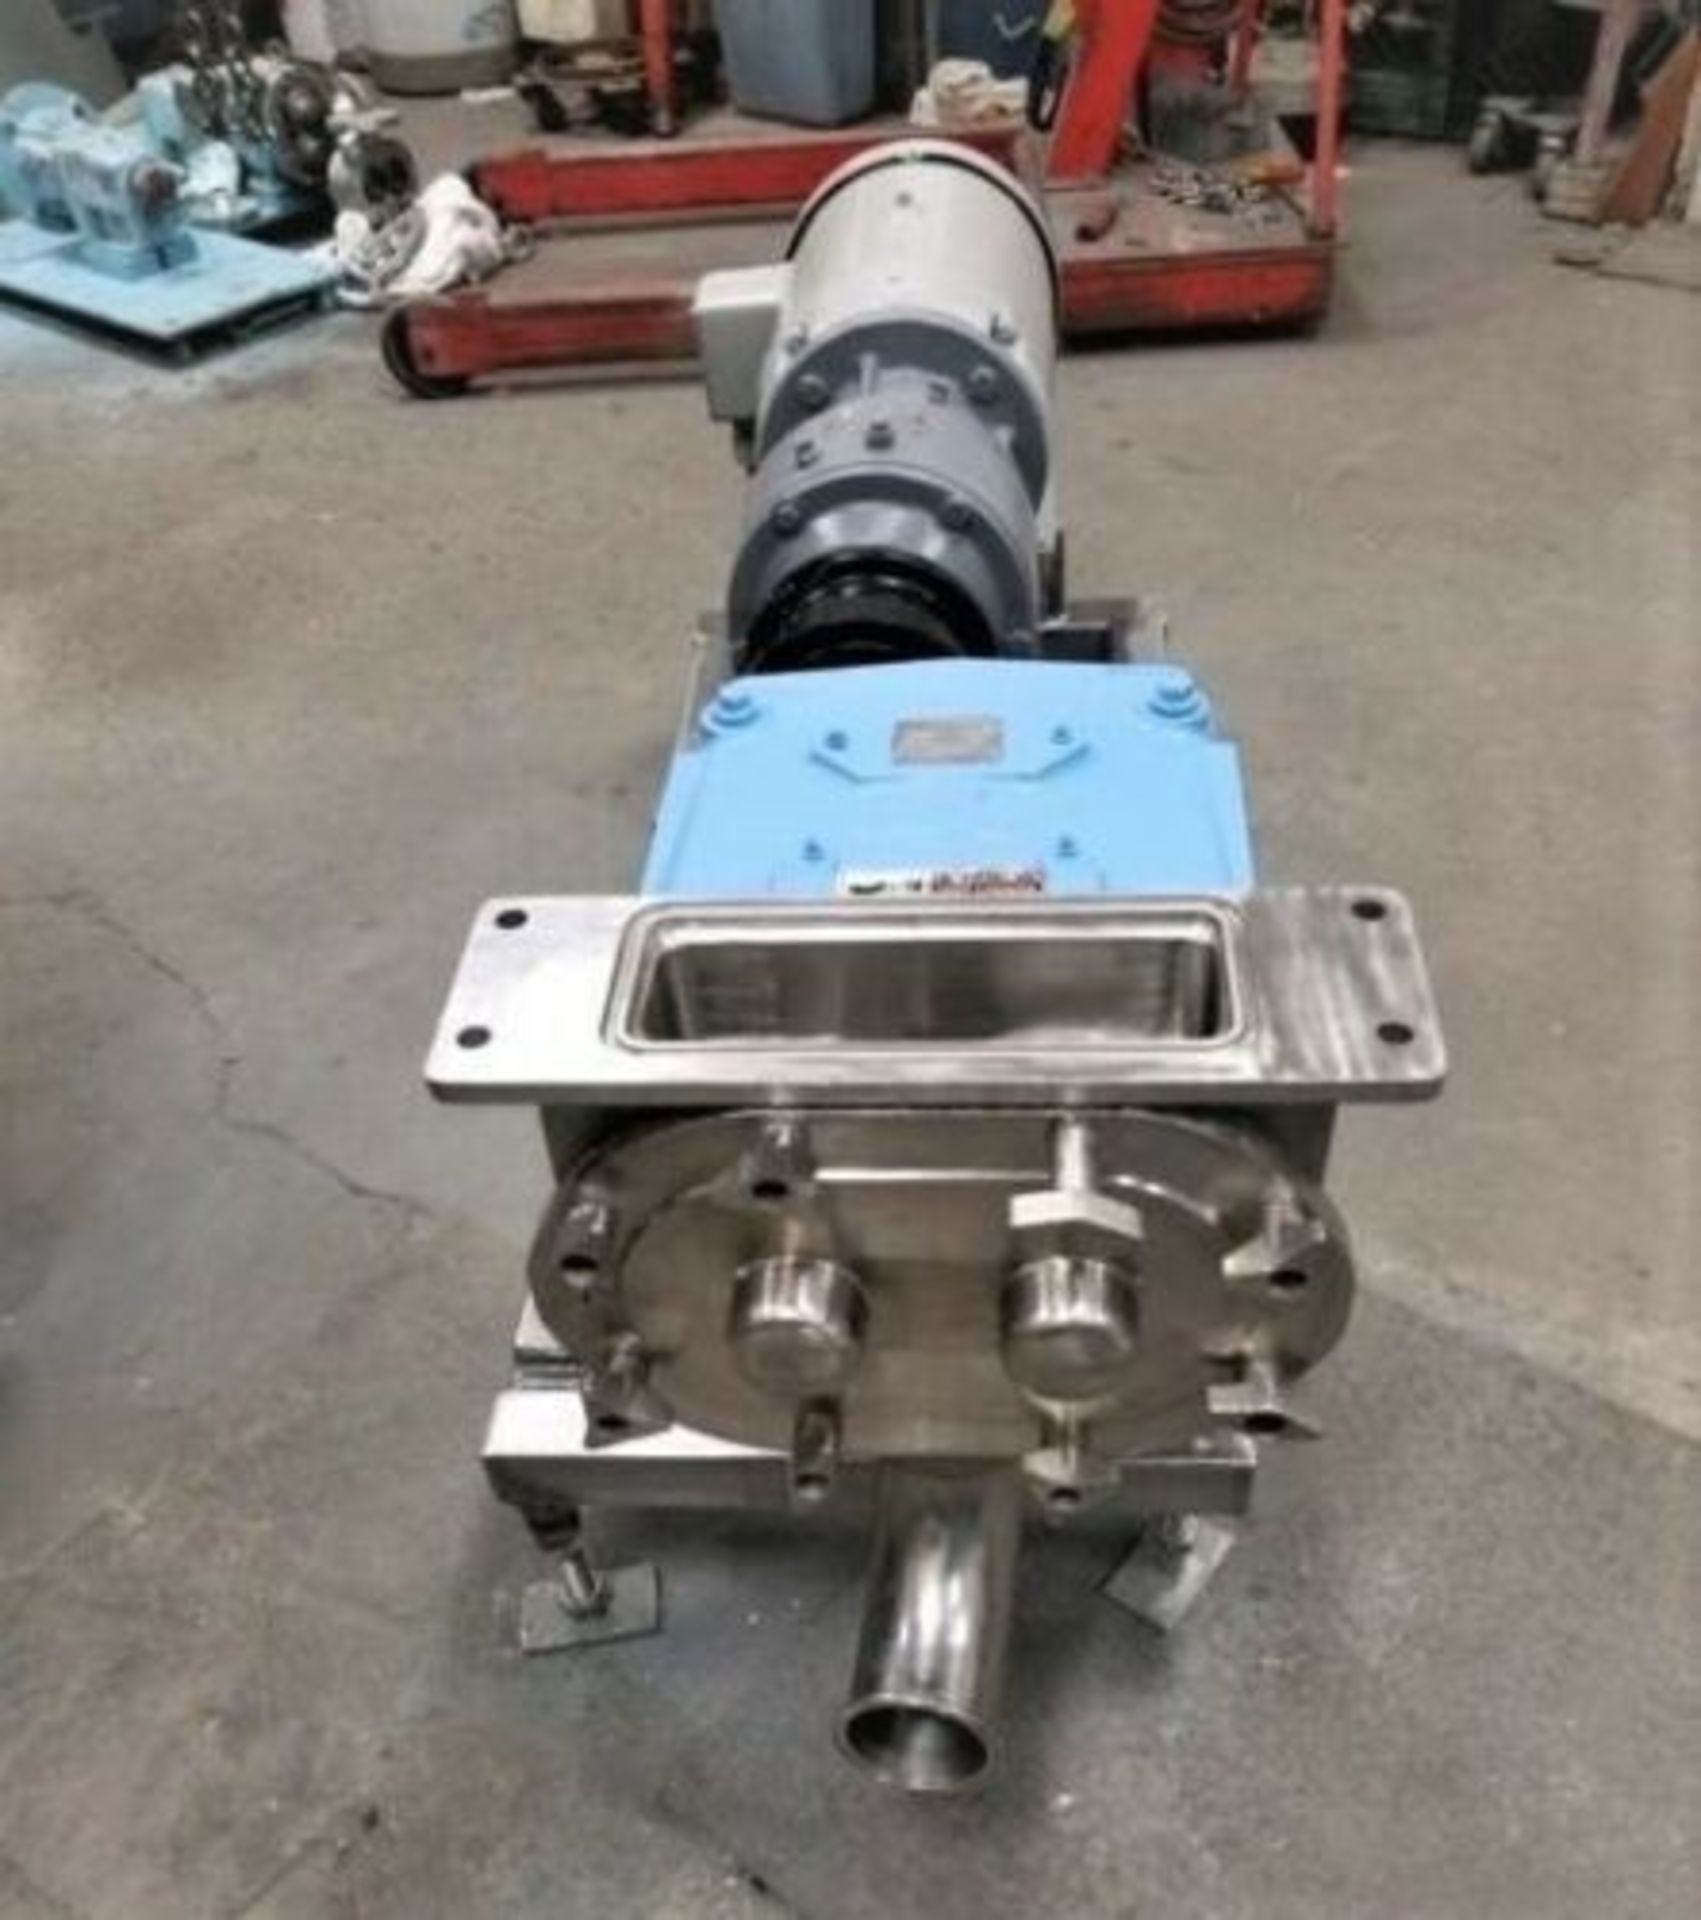 Waukesha SPX Model 134 Stainless Steel Sanitary Positive Displacement Pump, Serial # 300918 02 - Image 6 of 9